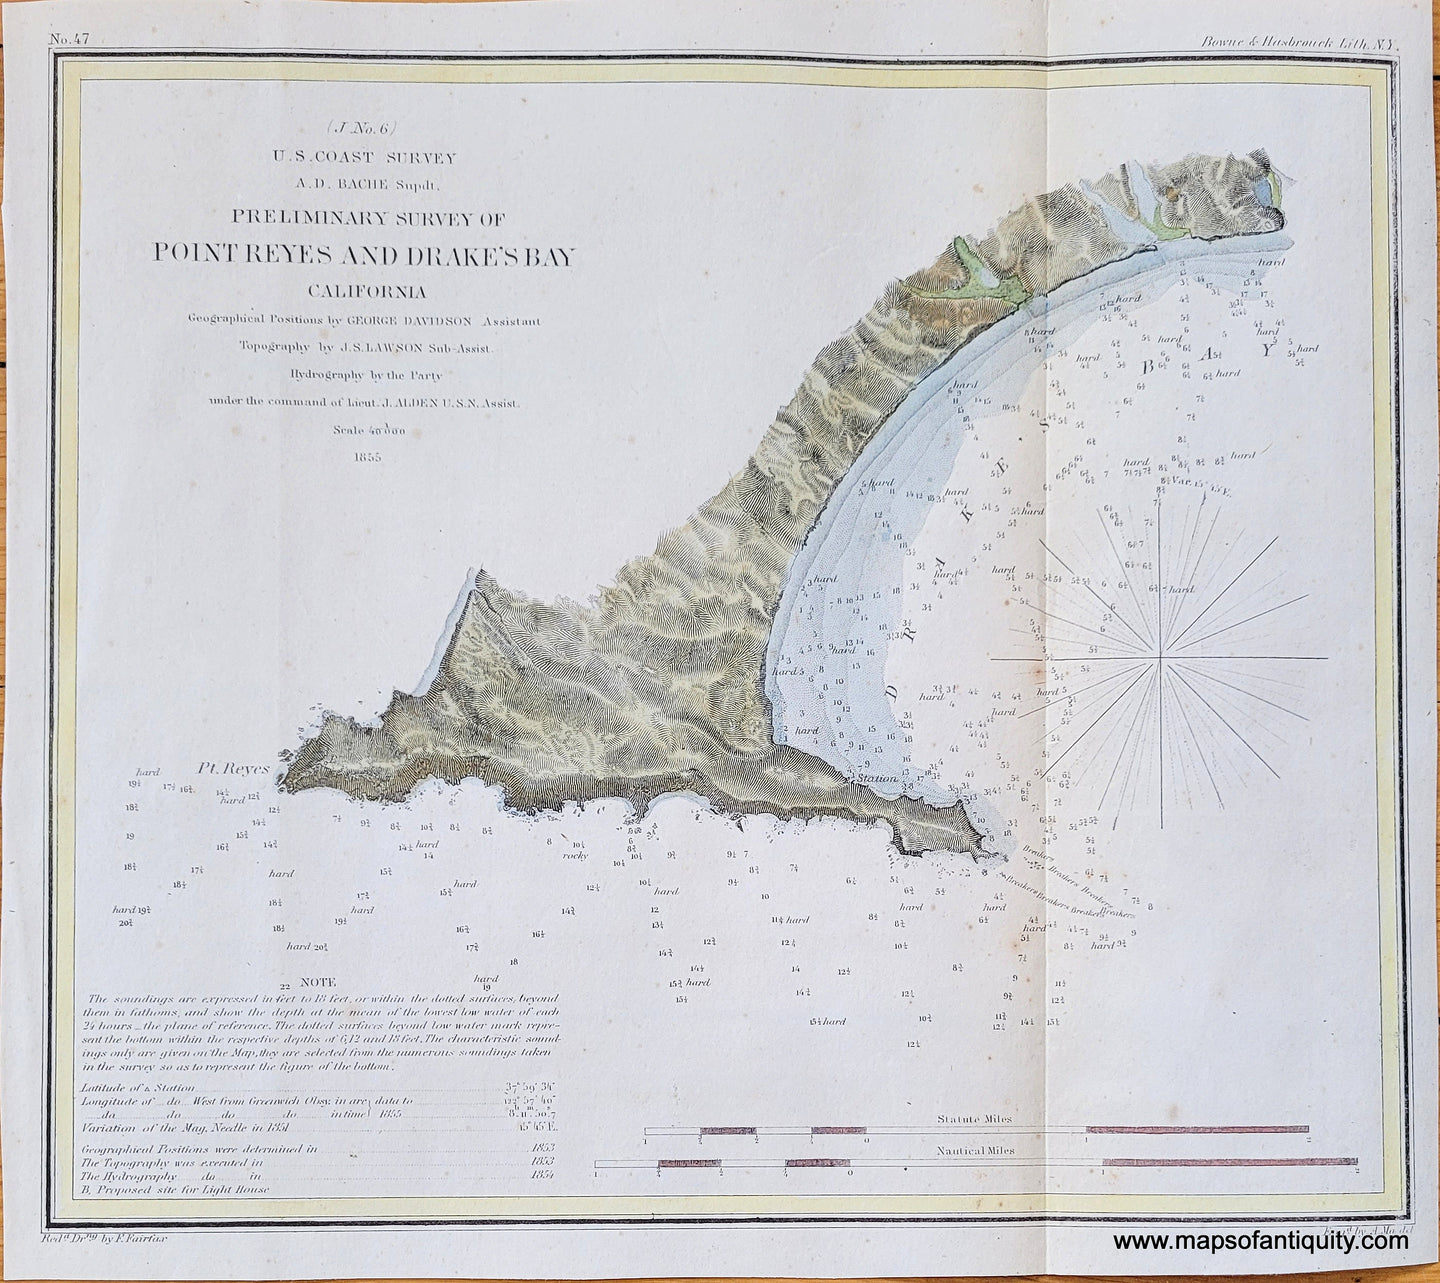 Antique-hand-colored-Coast-Chart-Preliminary-Survey-of-Point-Reyes-and-Drake's-Bay,-California-1855-USCS-West-California-1800s-19th-century-Maps-of-Antiquity